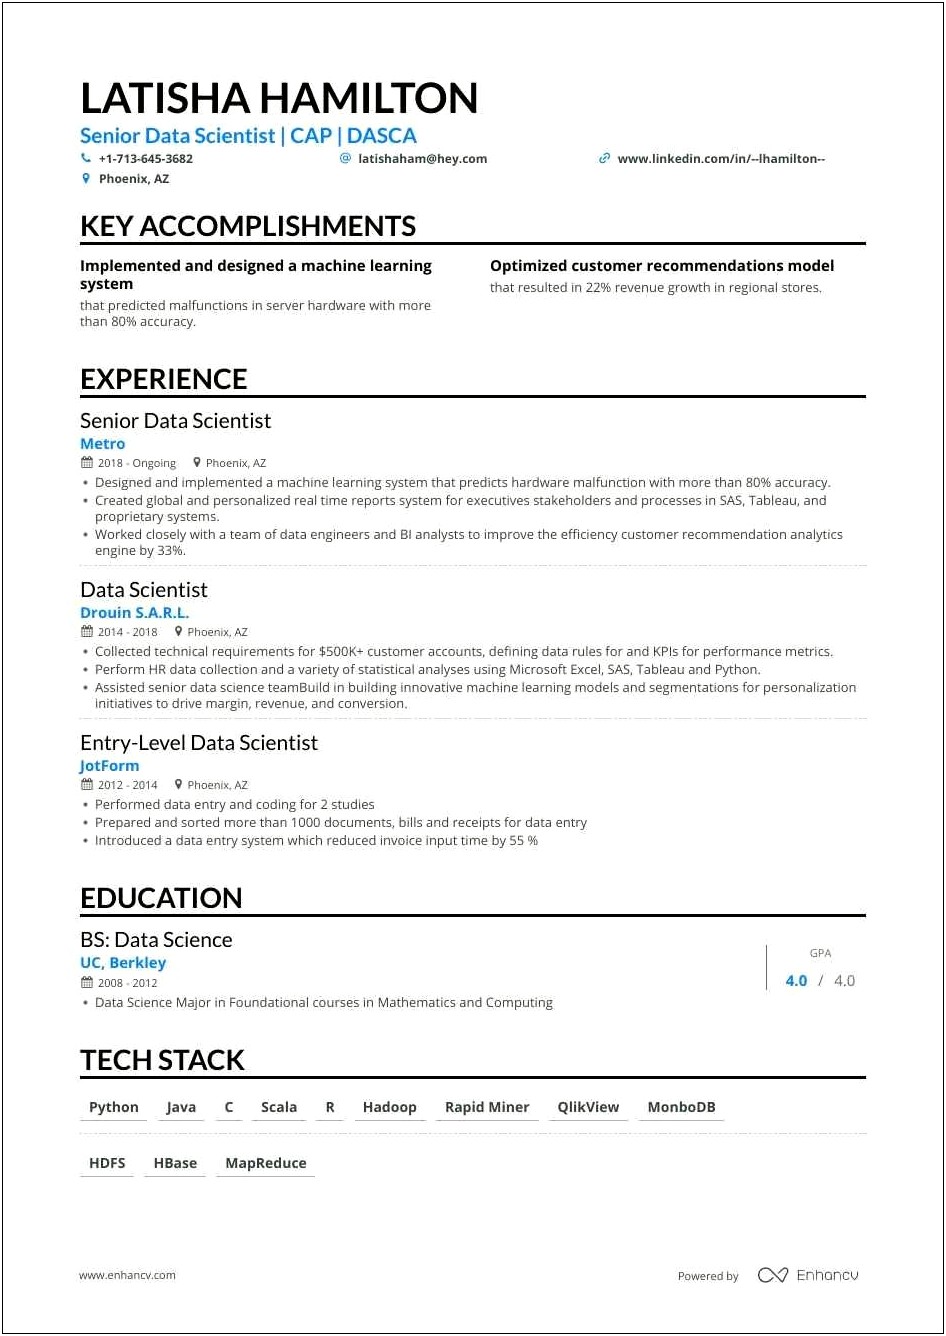 Should Education Be Above Experience On Resume